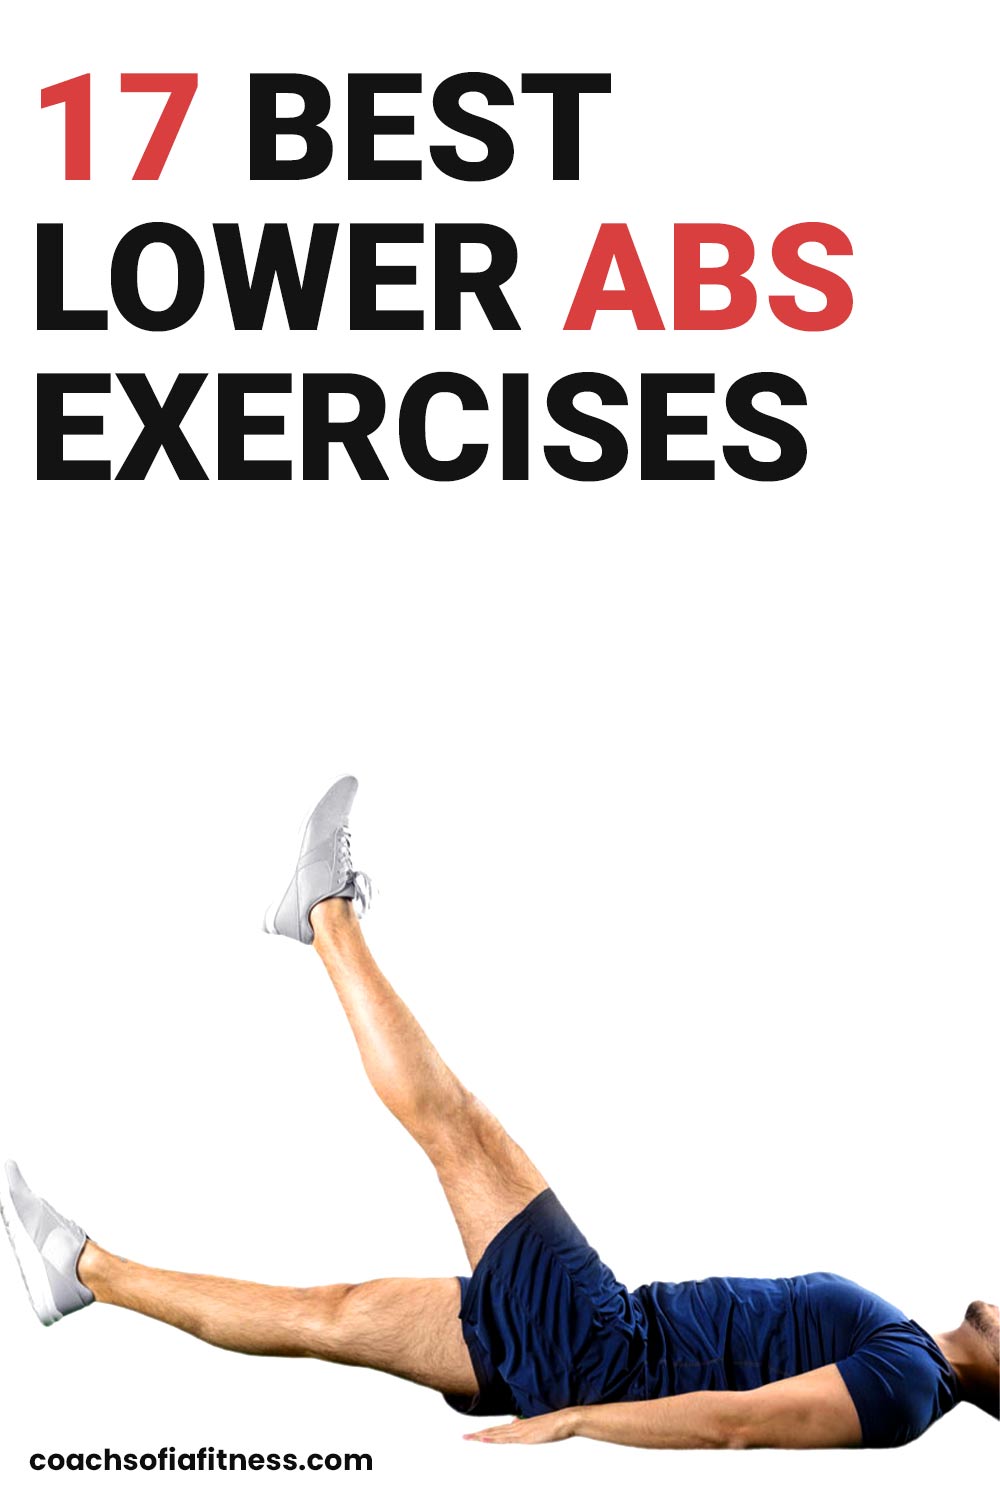 17 Lower Abs Exercises to Target Your Lower Abdominals - Coach